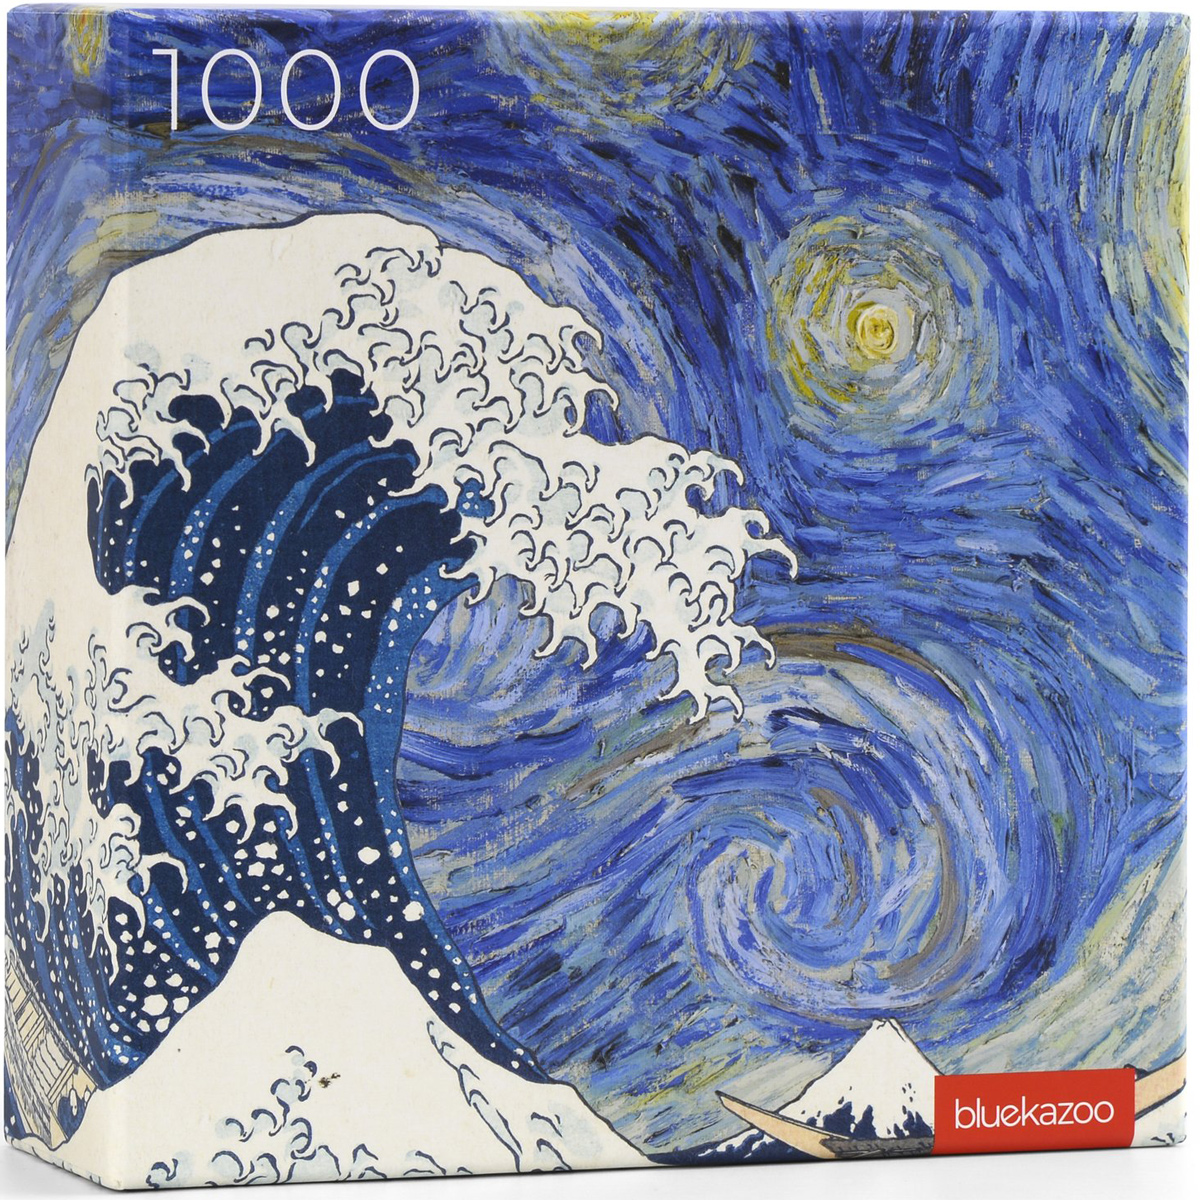 Starry Wave - A 1,000-piece Jigsaw Puzzle Featuring 'Starry Night' and 'The Wave'